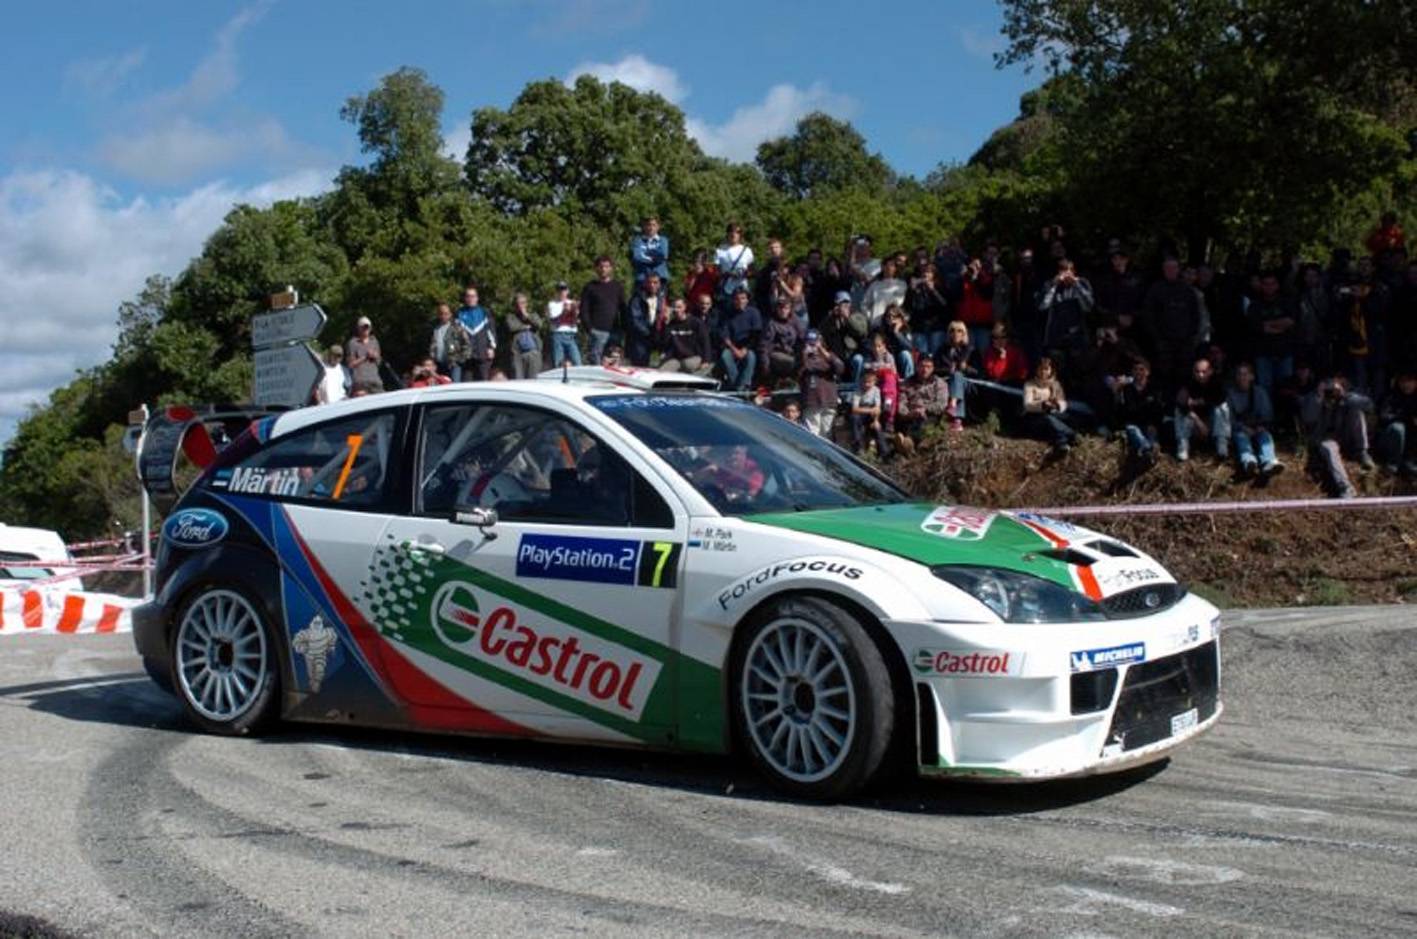 040215silvauct_2005-Ford-Focus-WRC-Winni